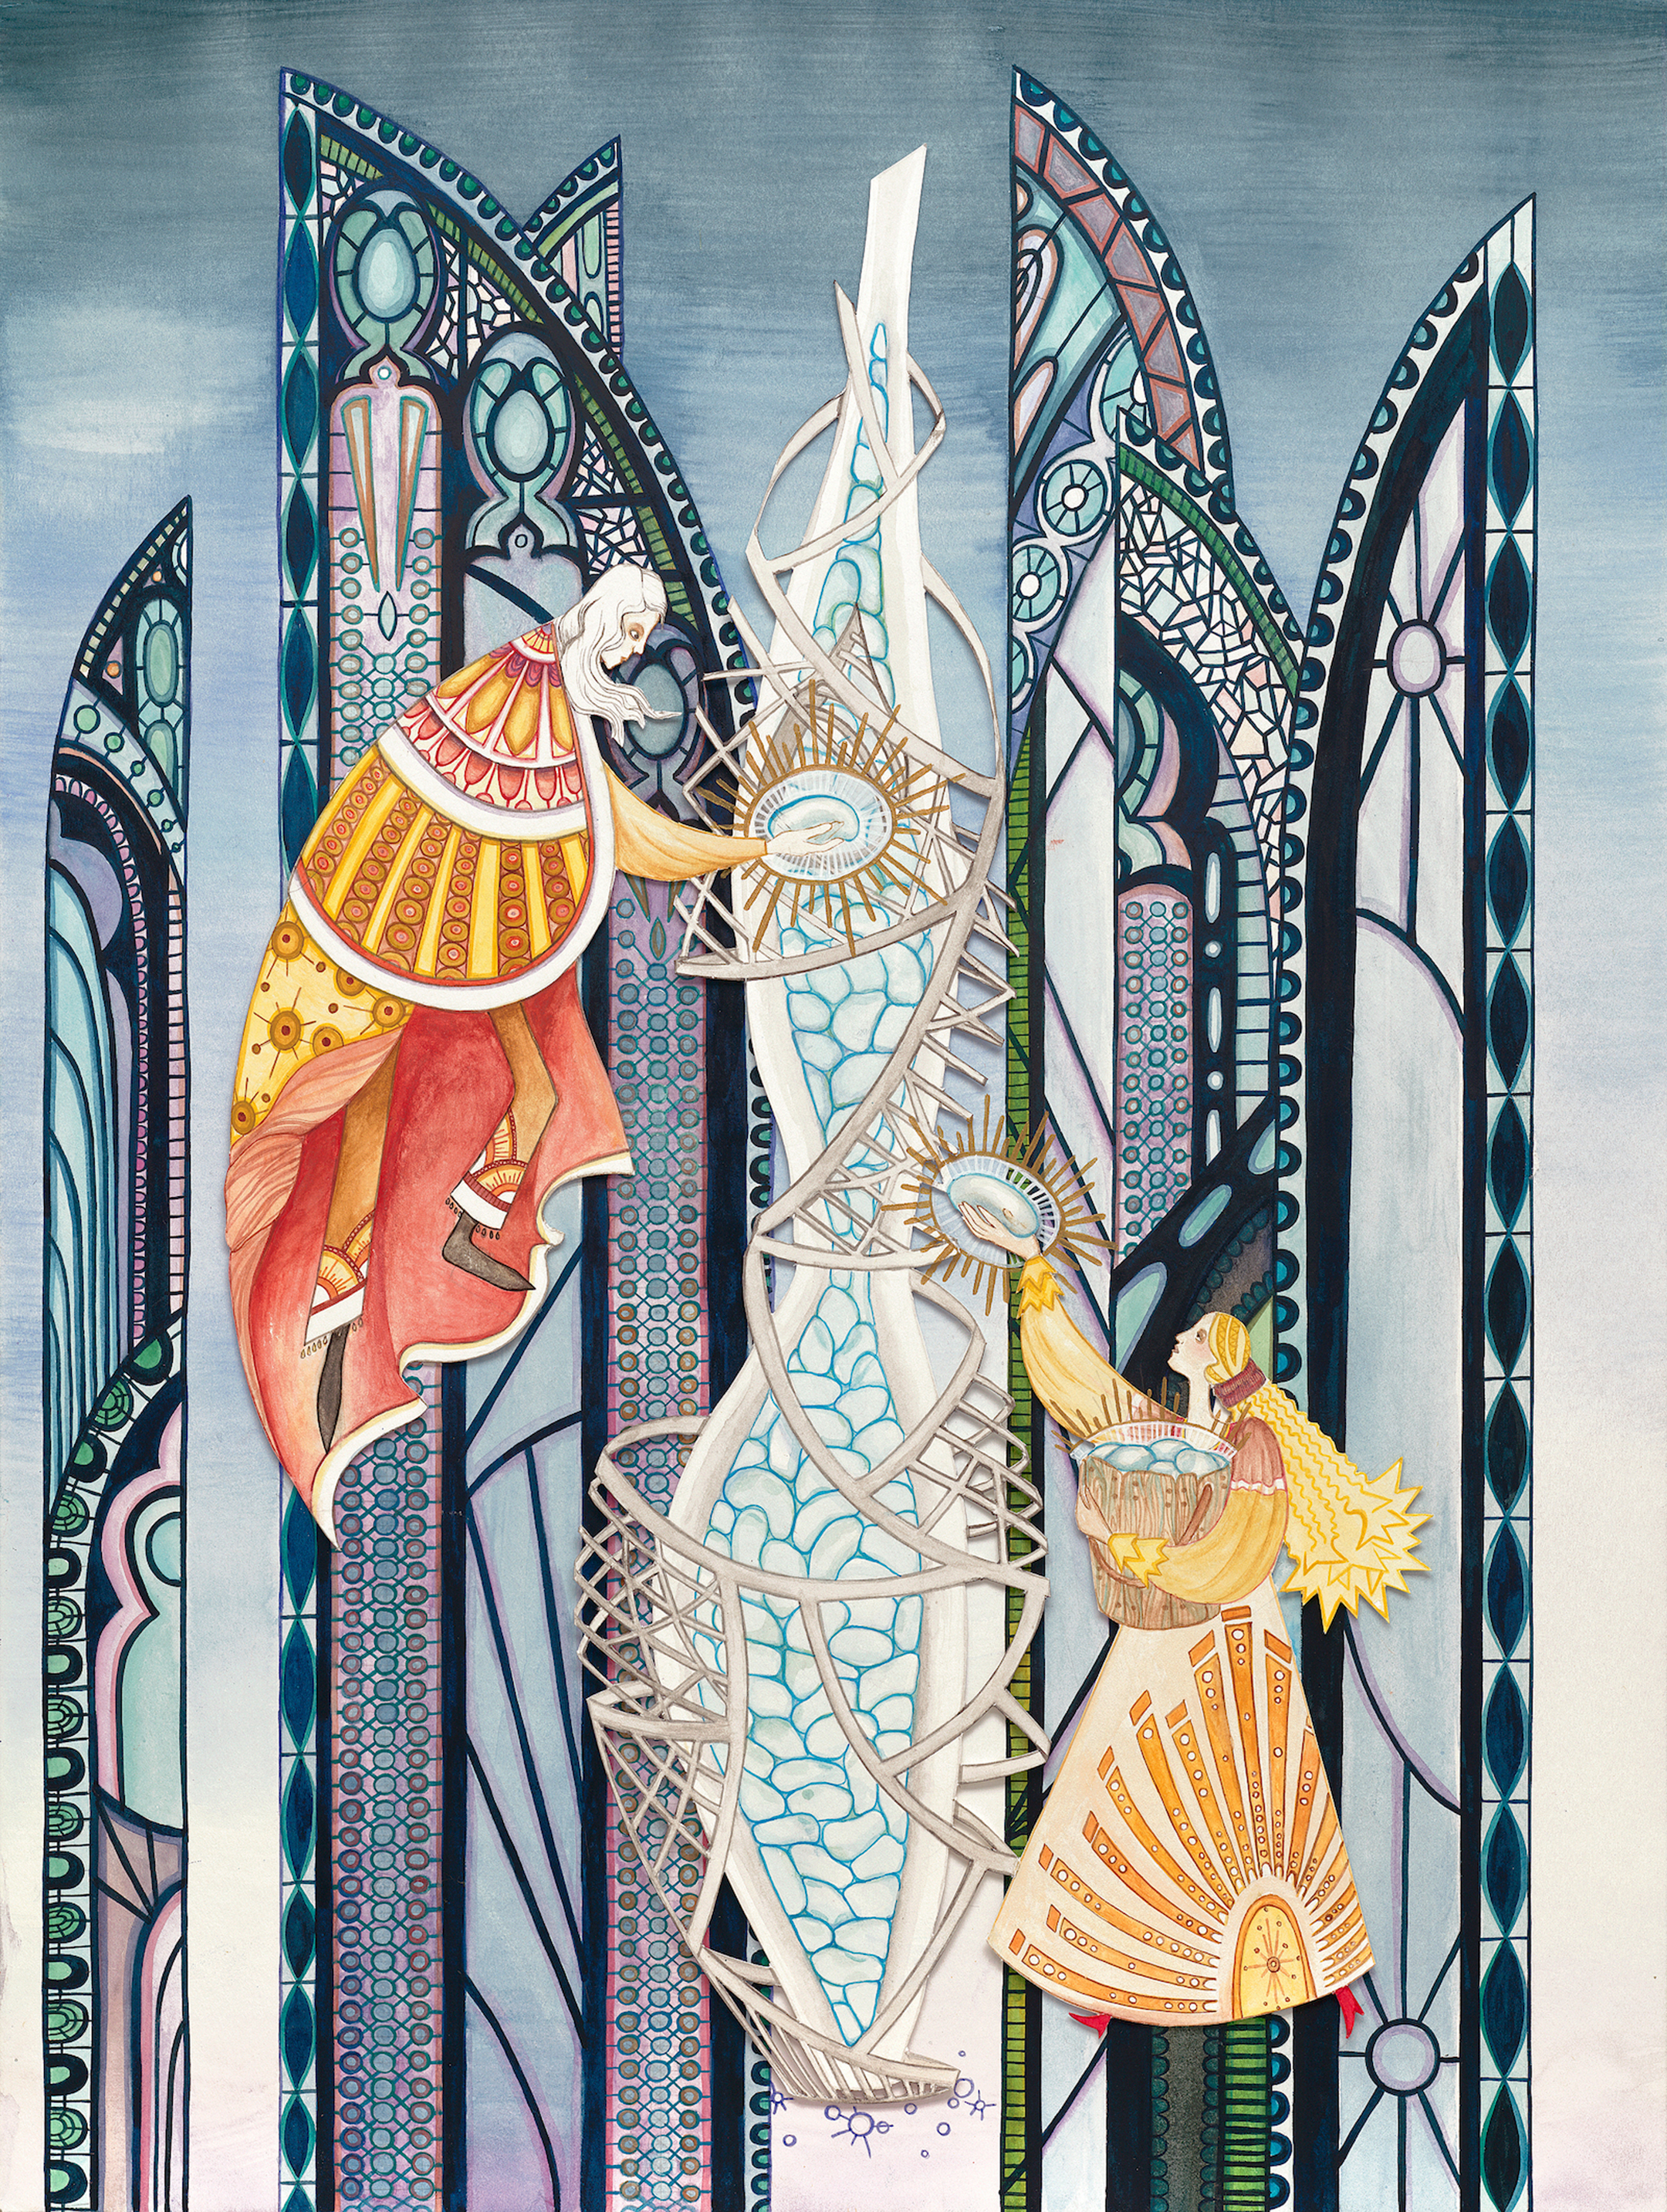 Illustration resembling stained glass depicting two young women harvesting stars